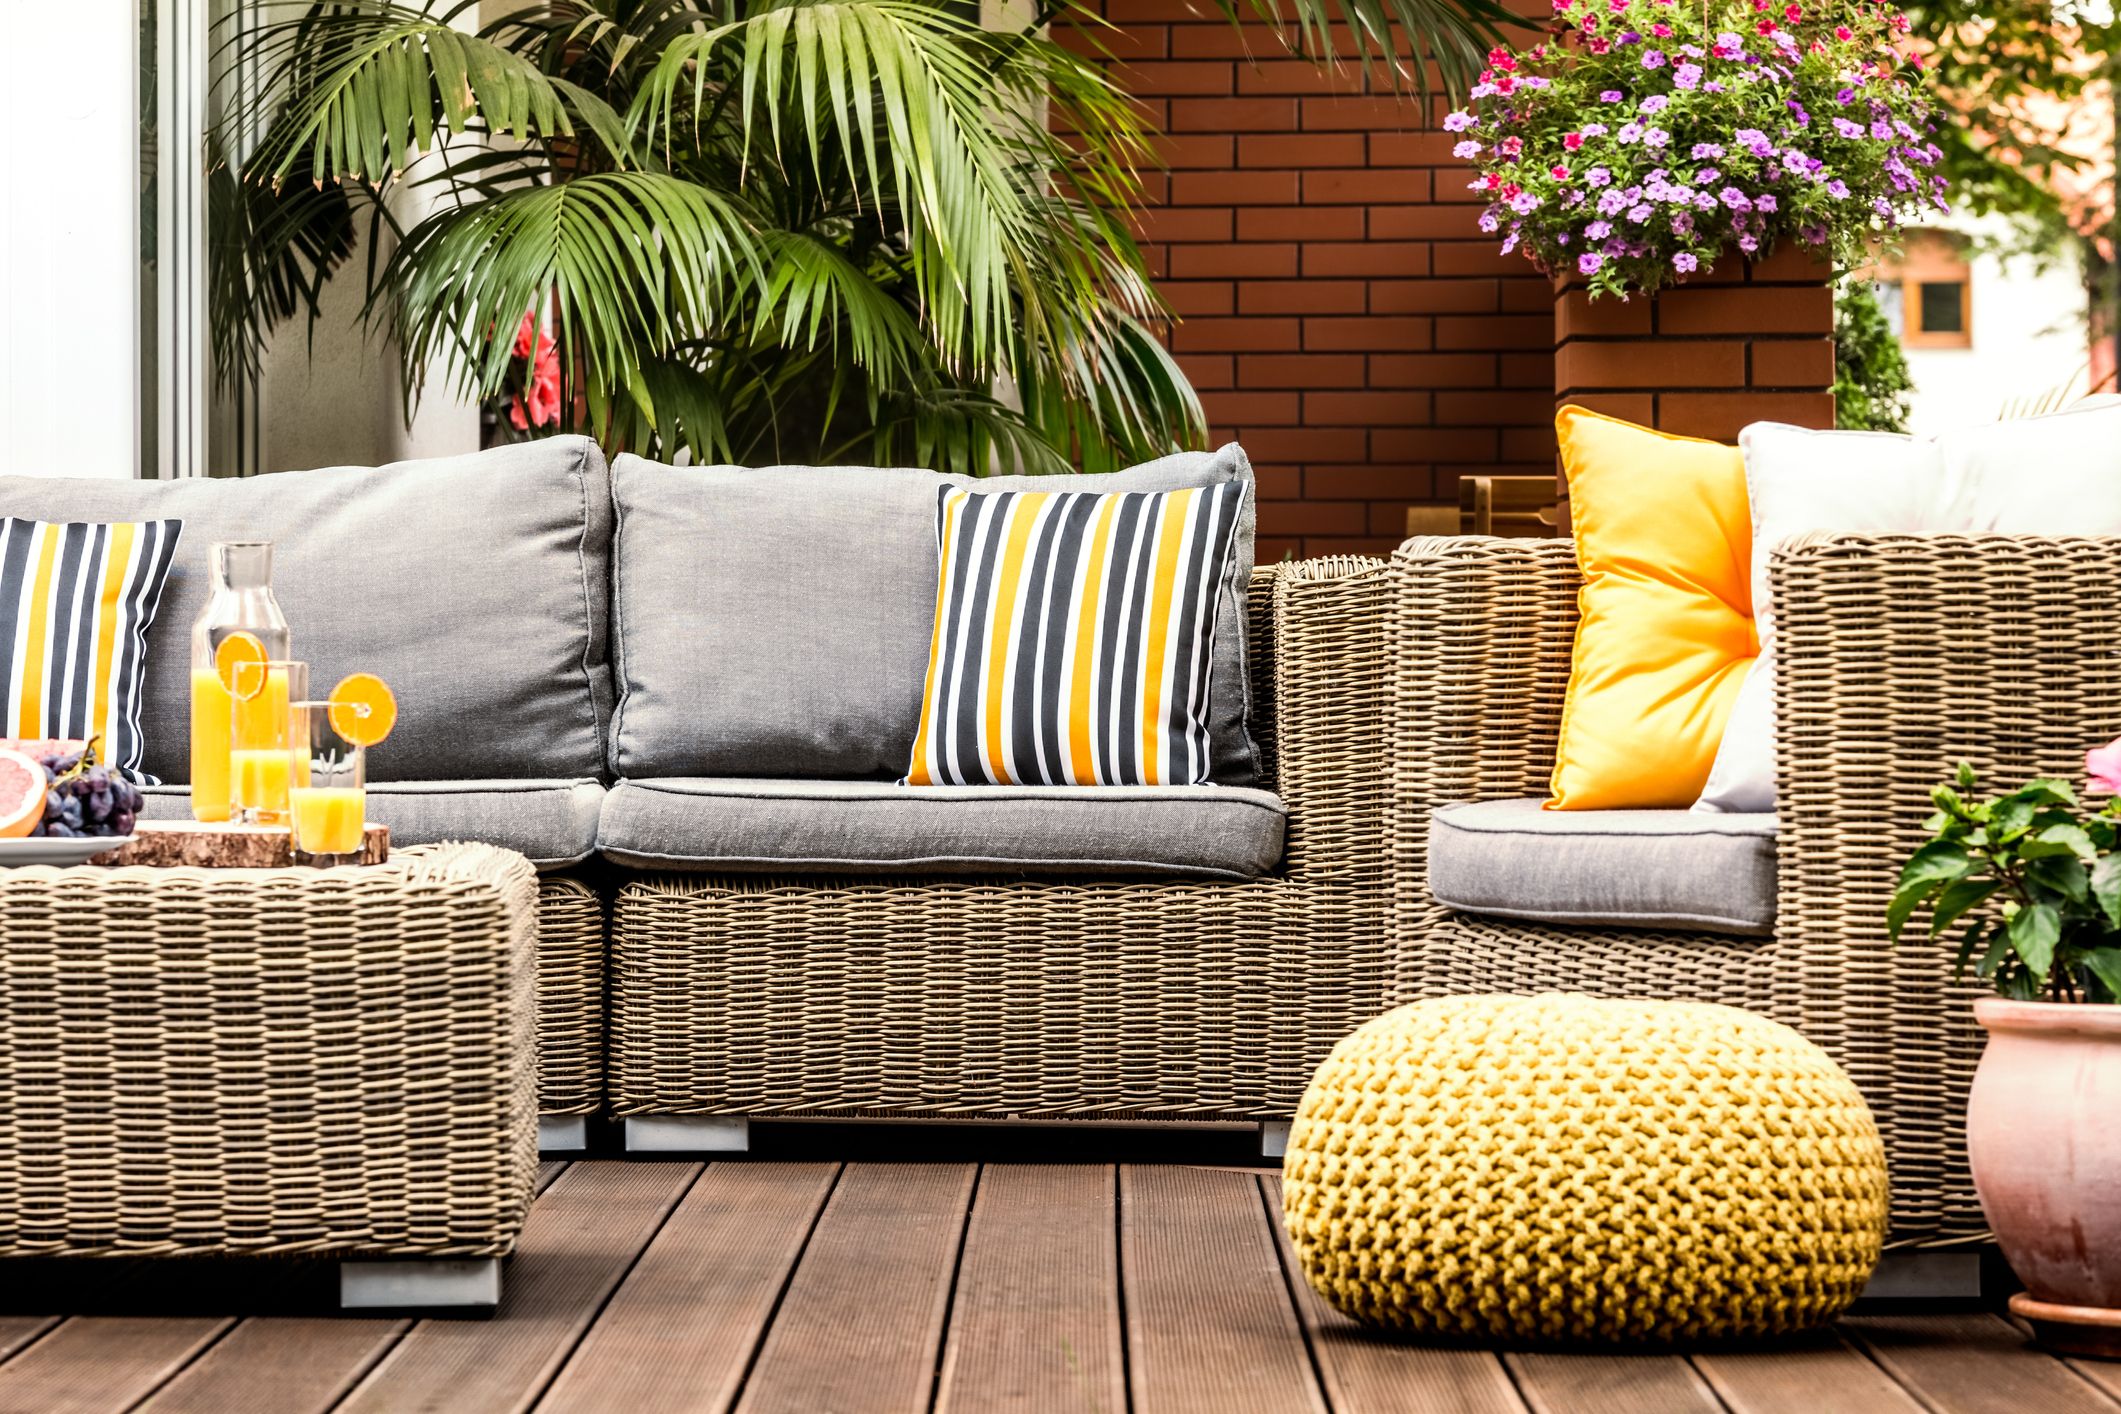 13 Outdoor Cushions To Spruce Up Your